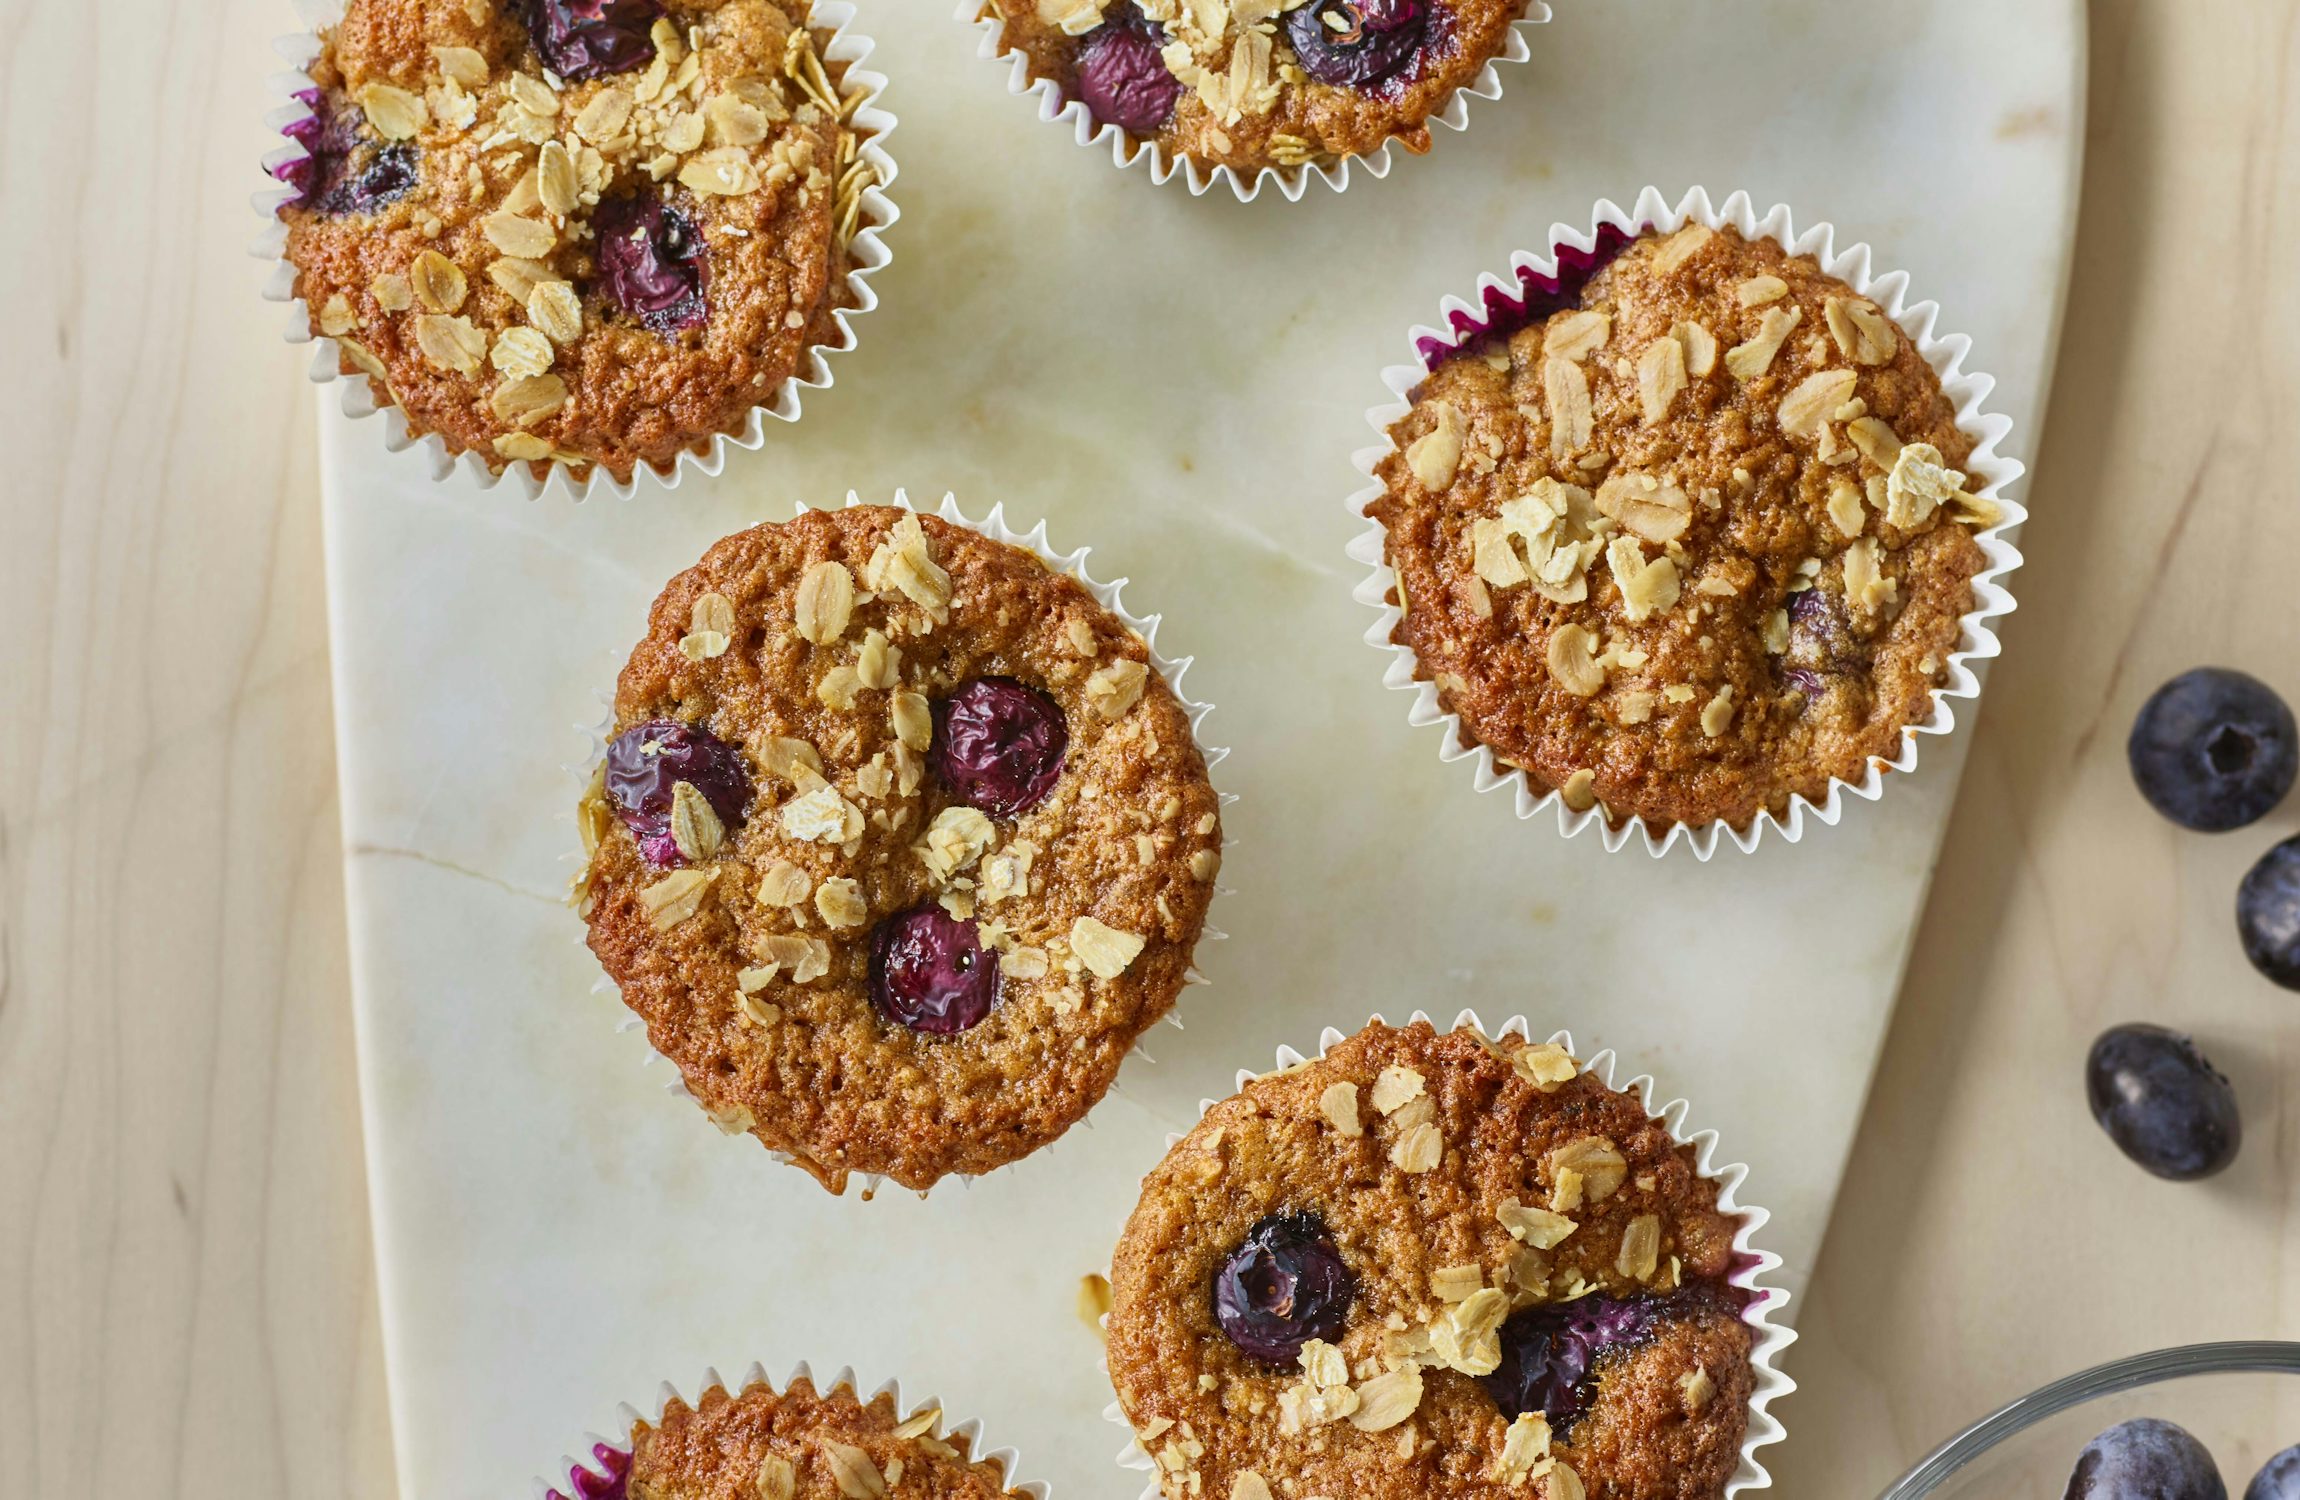 Healthy Top Blueberry Muffins